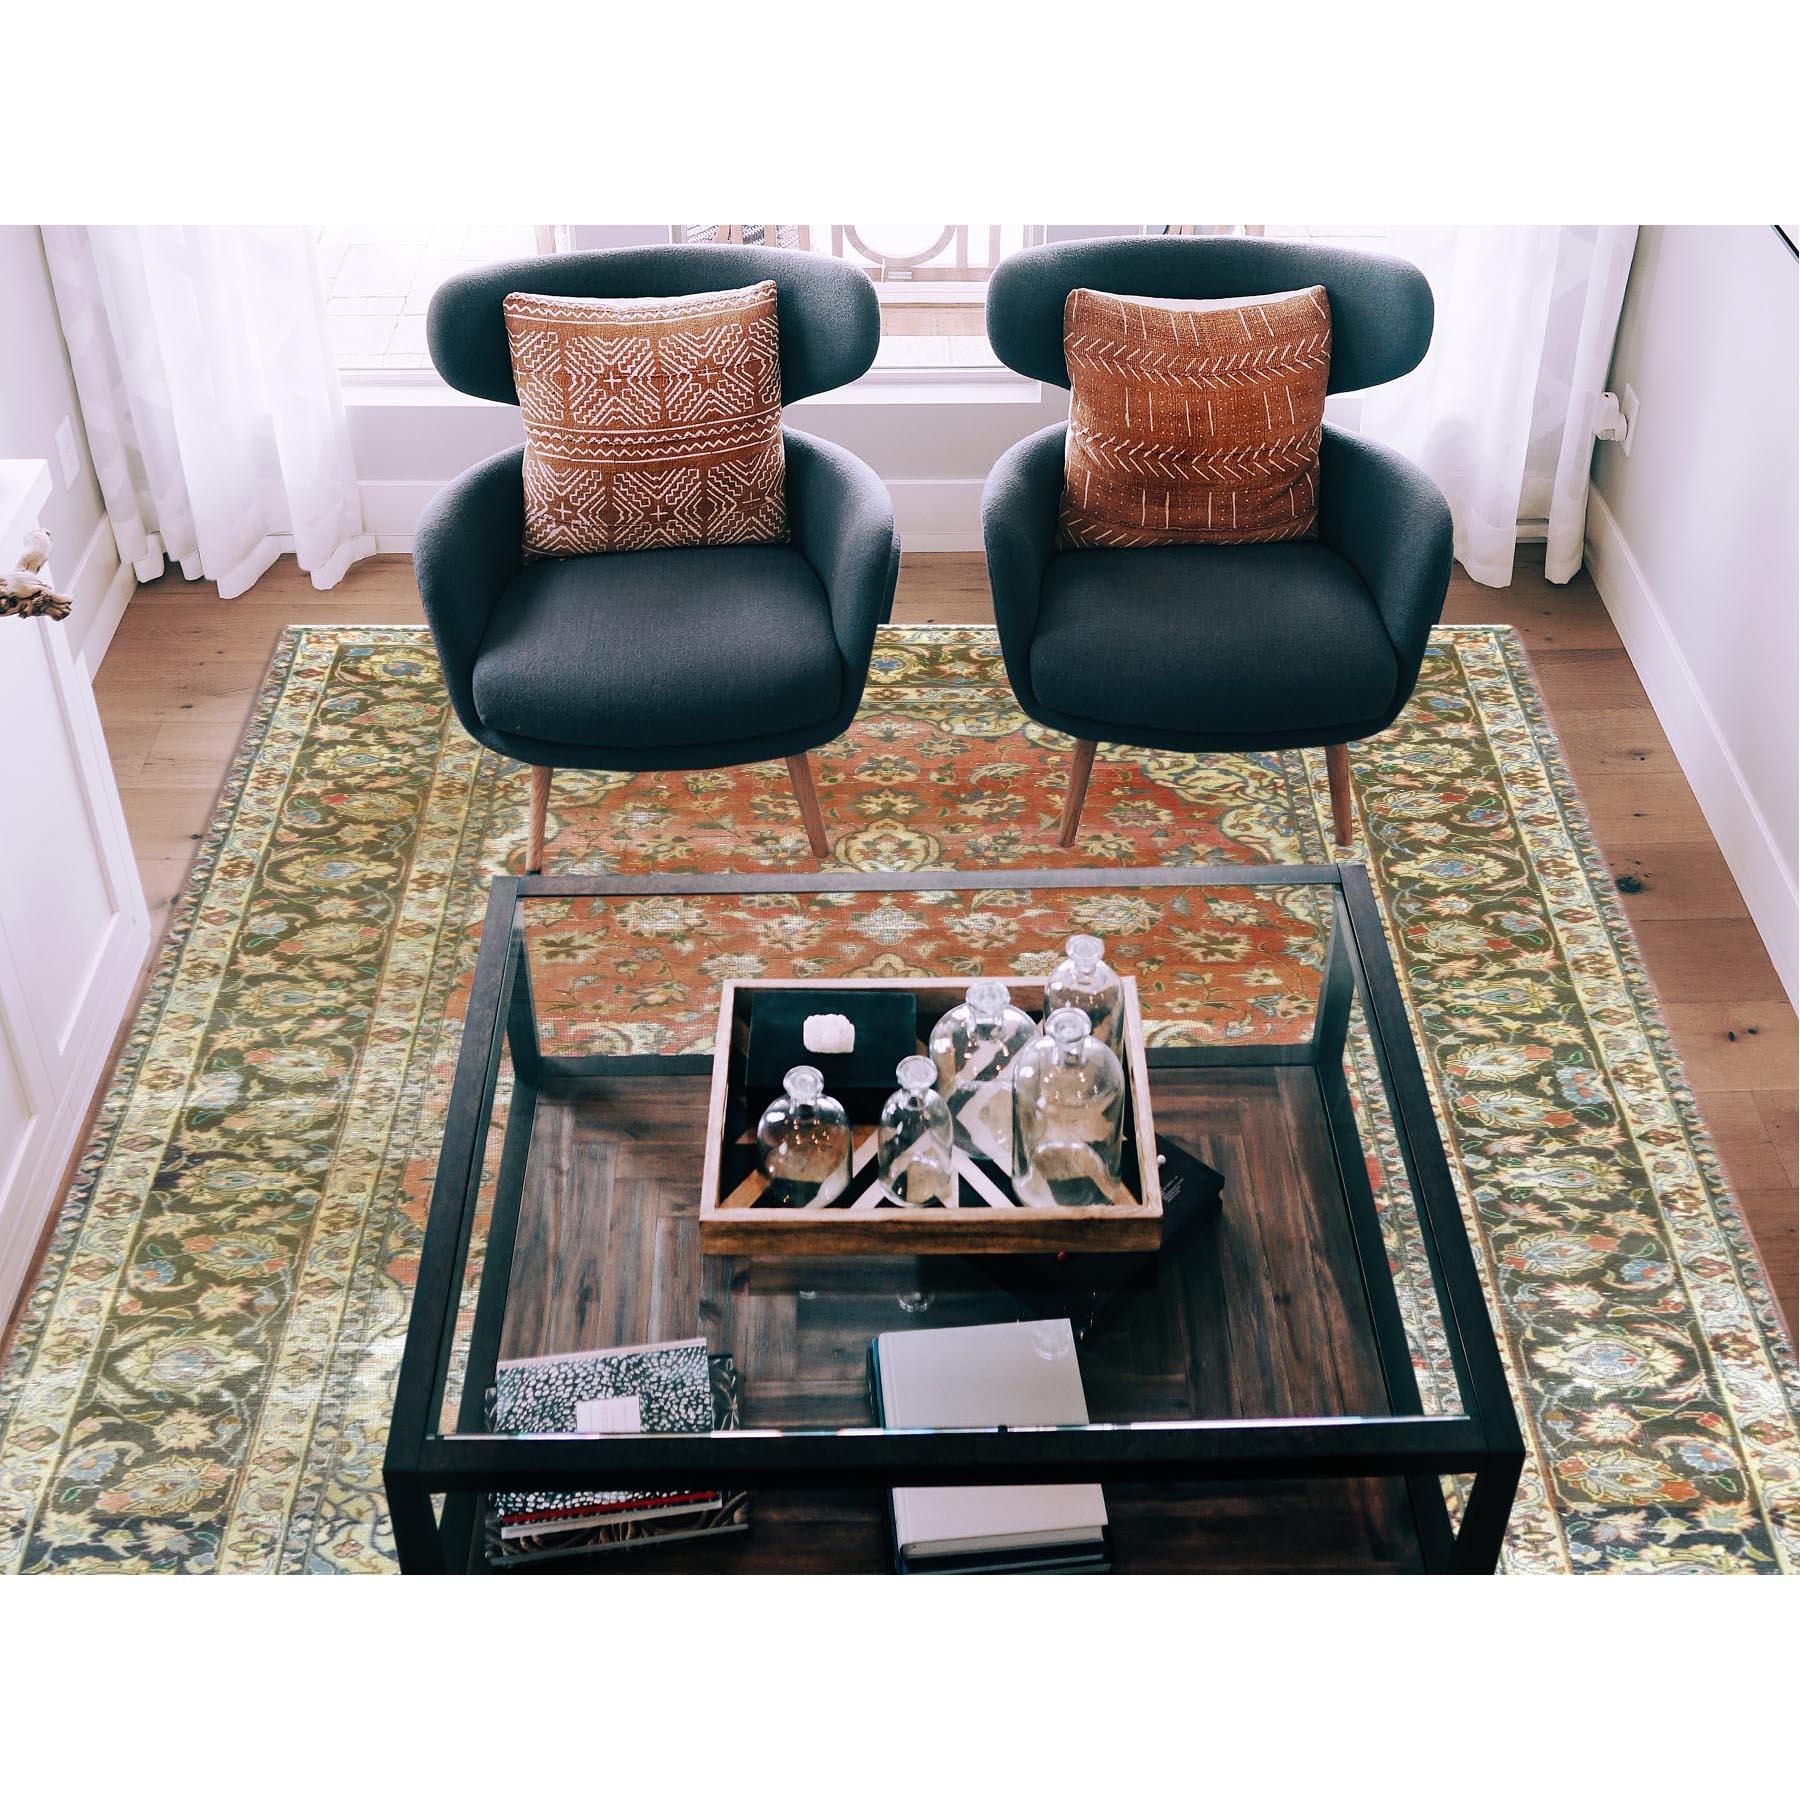 This fabulous hand-knotted carpet has been created and designed for extra strength and durability. This rug has been handcrafted for weeks in the traditional method that is used to make
Exact rug size in feet and inches: 6'10